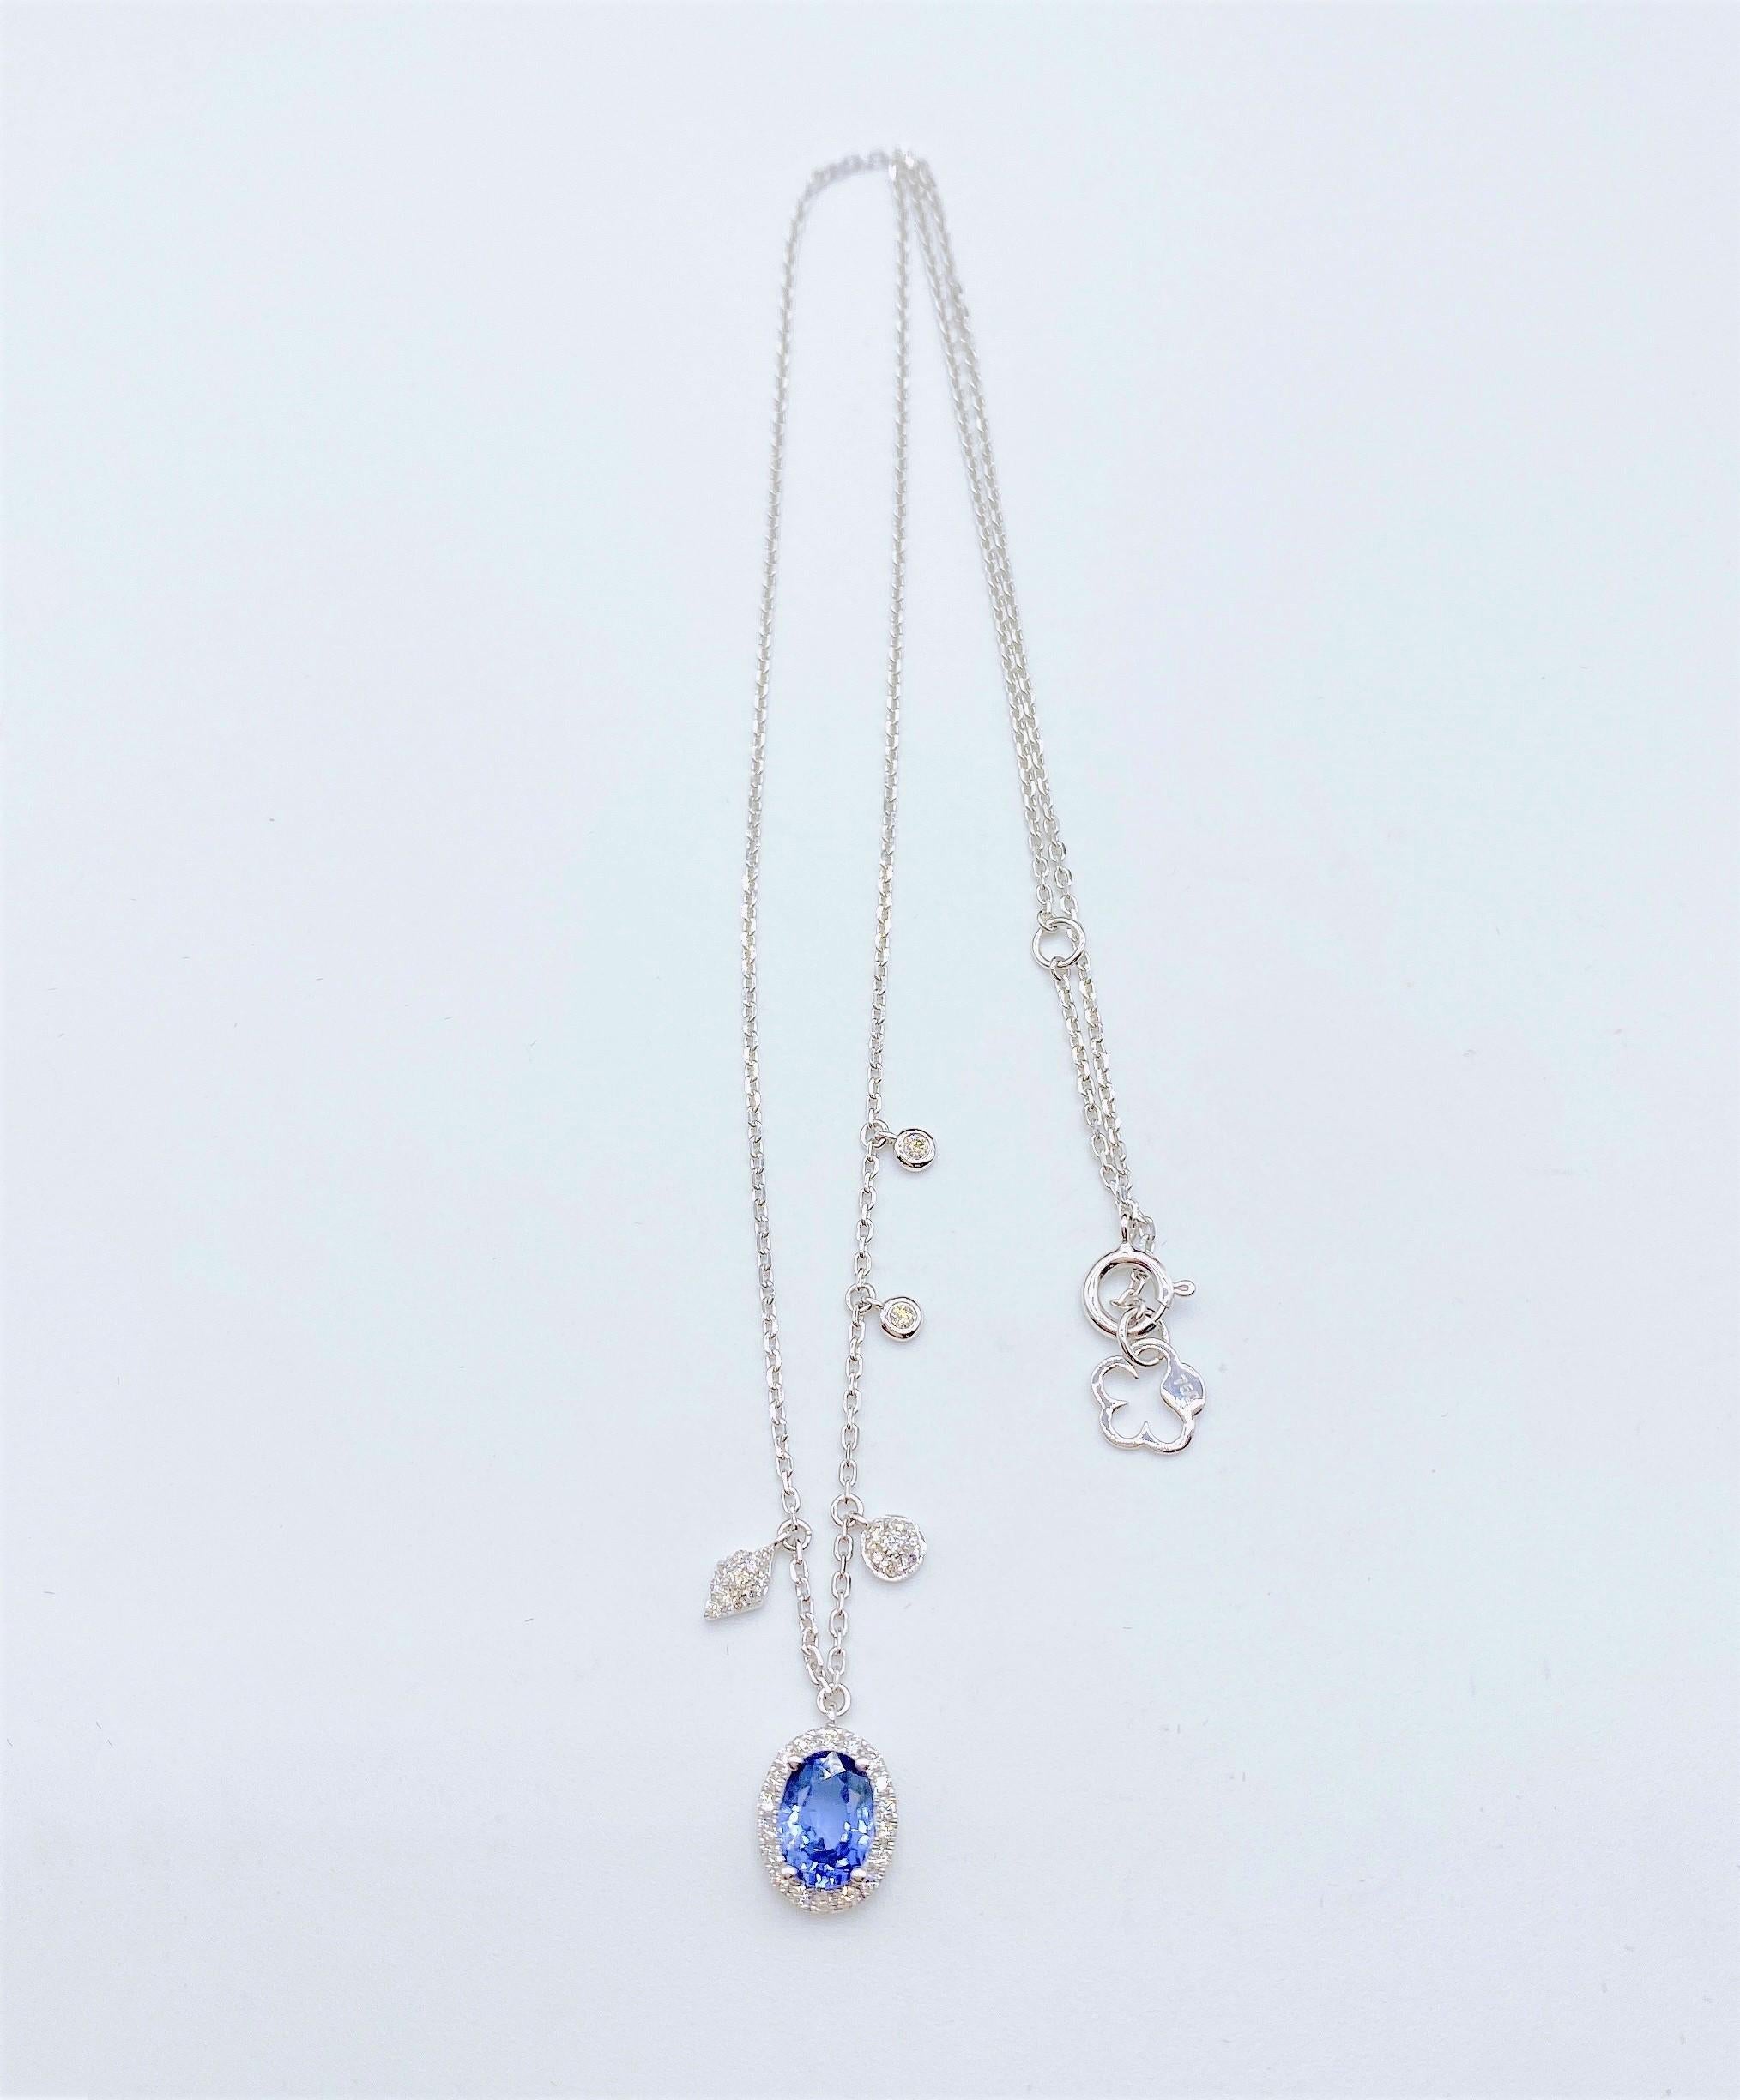 The Following Item we are offering is a Rare Important Radiant 18KT Gold Gorgeous Large Shimmering Blue Sapphire and Diamond Pendant Necklace. Pendant is comprised of Beautiful Shimmering Magnificent Blue Sapphire and adorned with Glittering